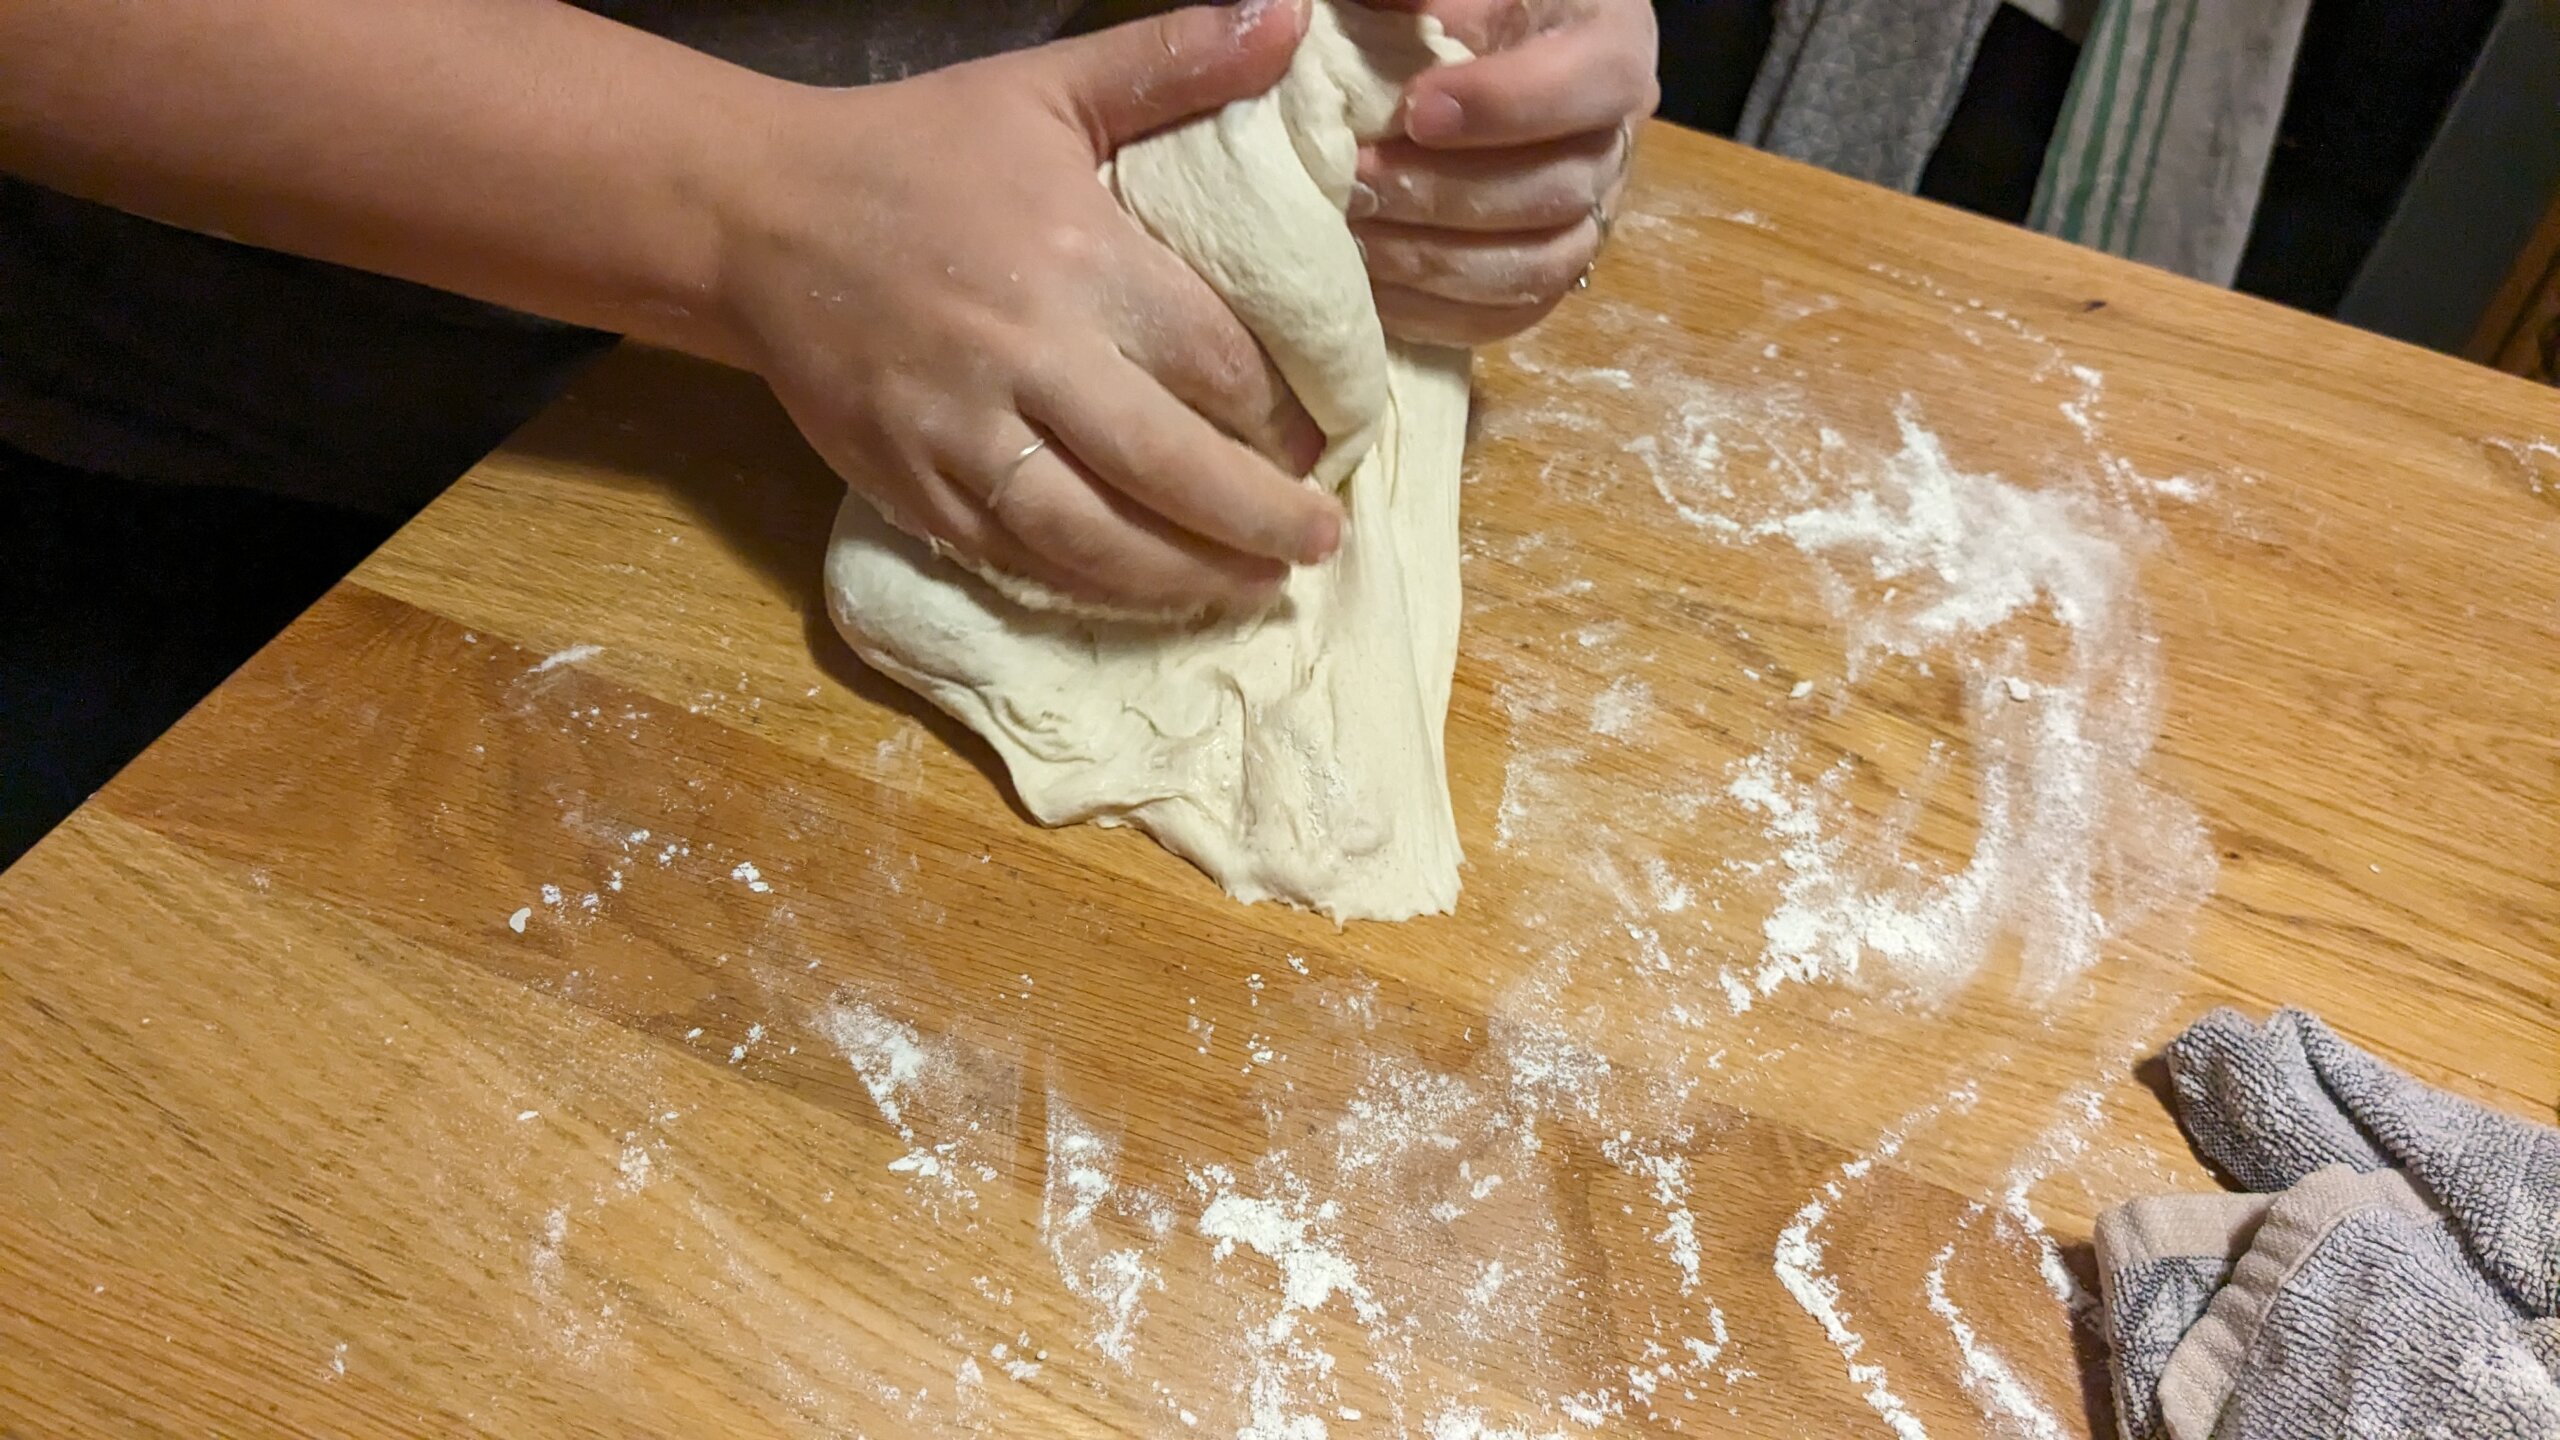 woman beginning to form sourdough into a loaf